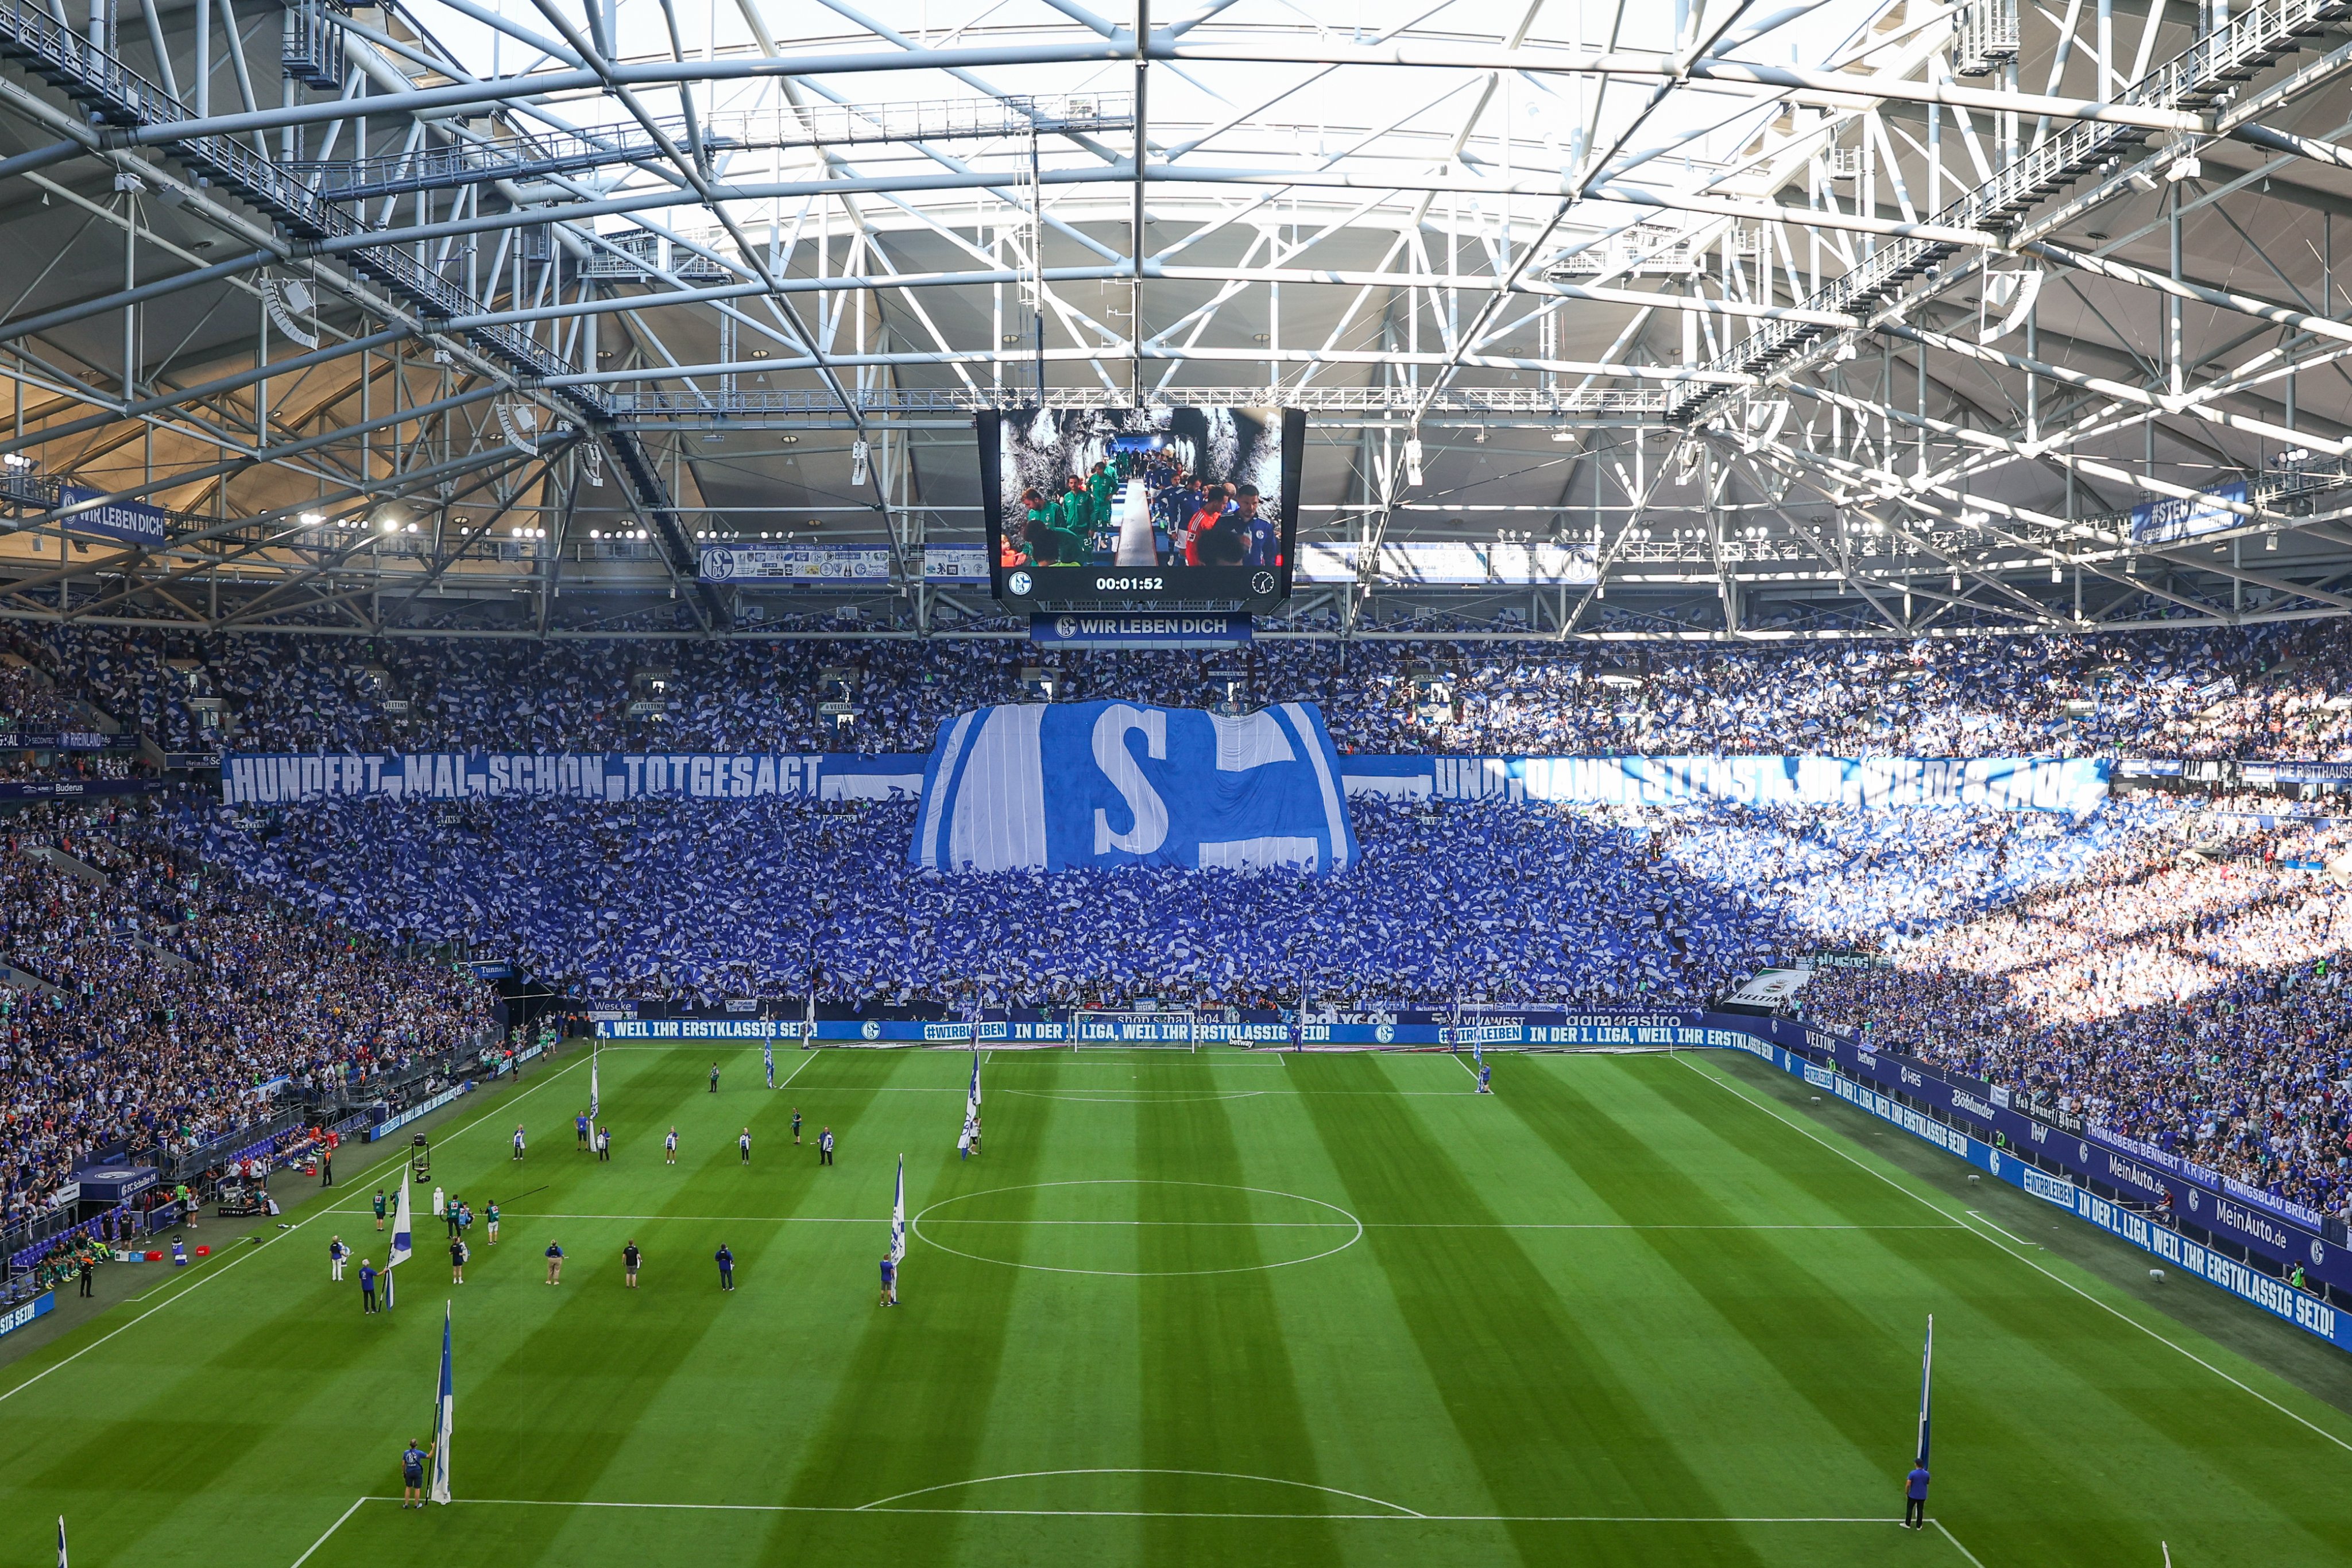 stå Moralsk vandtæt FC Schalke 04 on Twitter: "After Saturday's stunning tifo against Gladbach,  we decided to look back at some of the best displays from our fans in  recent years 🔵⚪ 🧵 Thread ⤵️